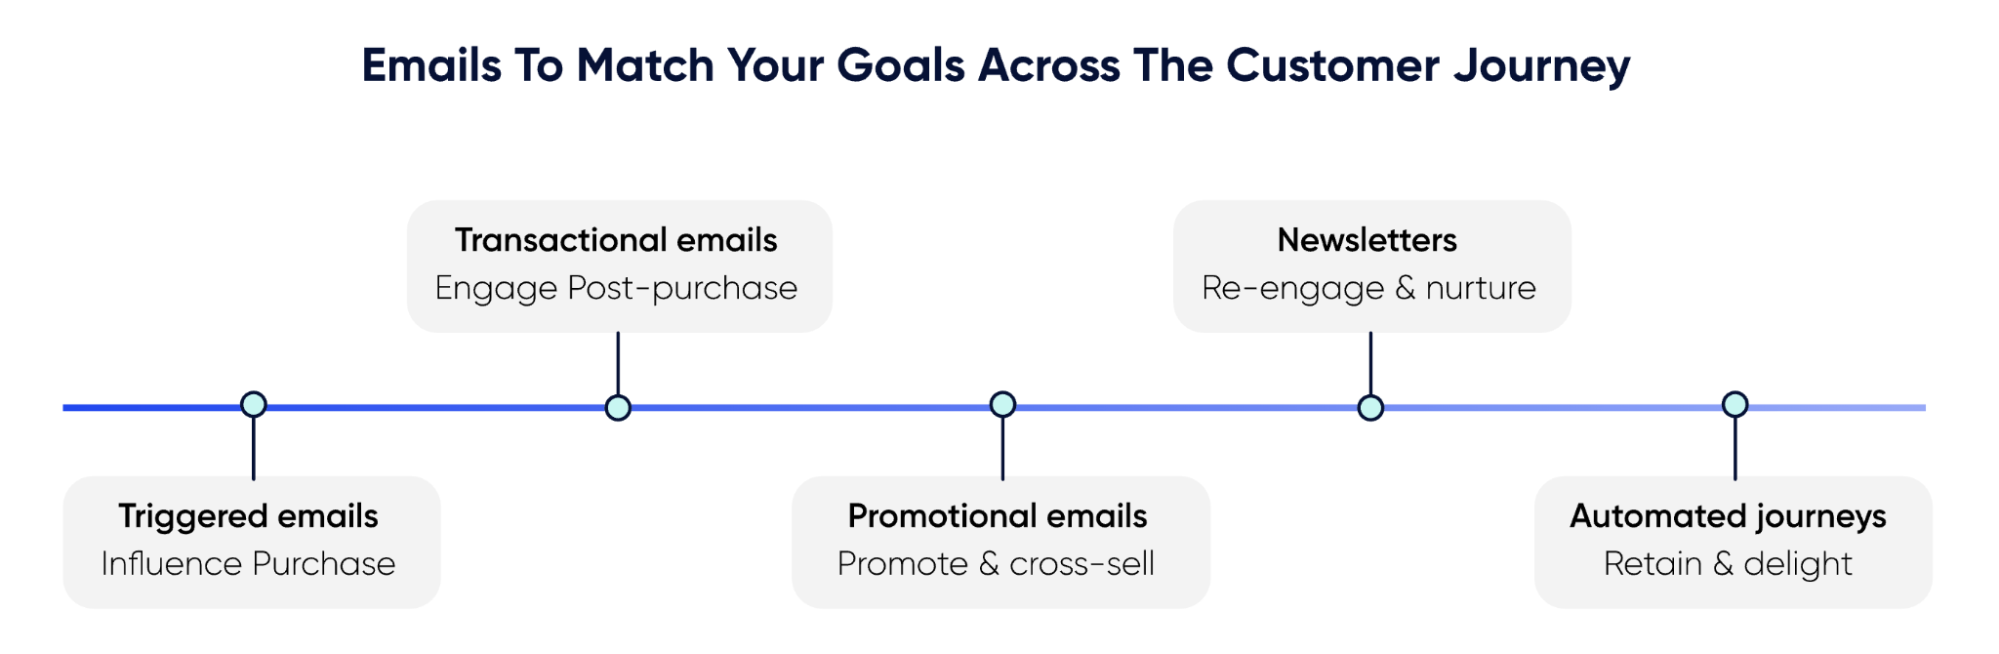 Customer lifecycle stages that can be used for email marketing